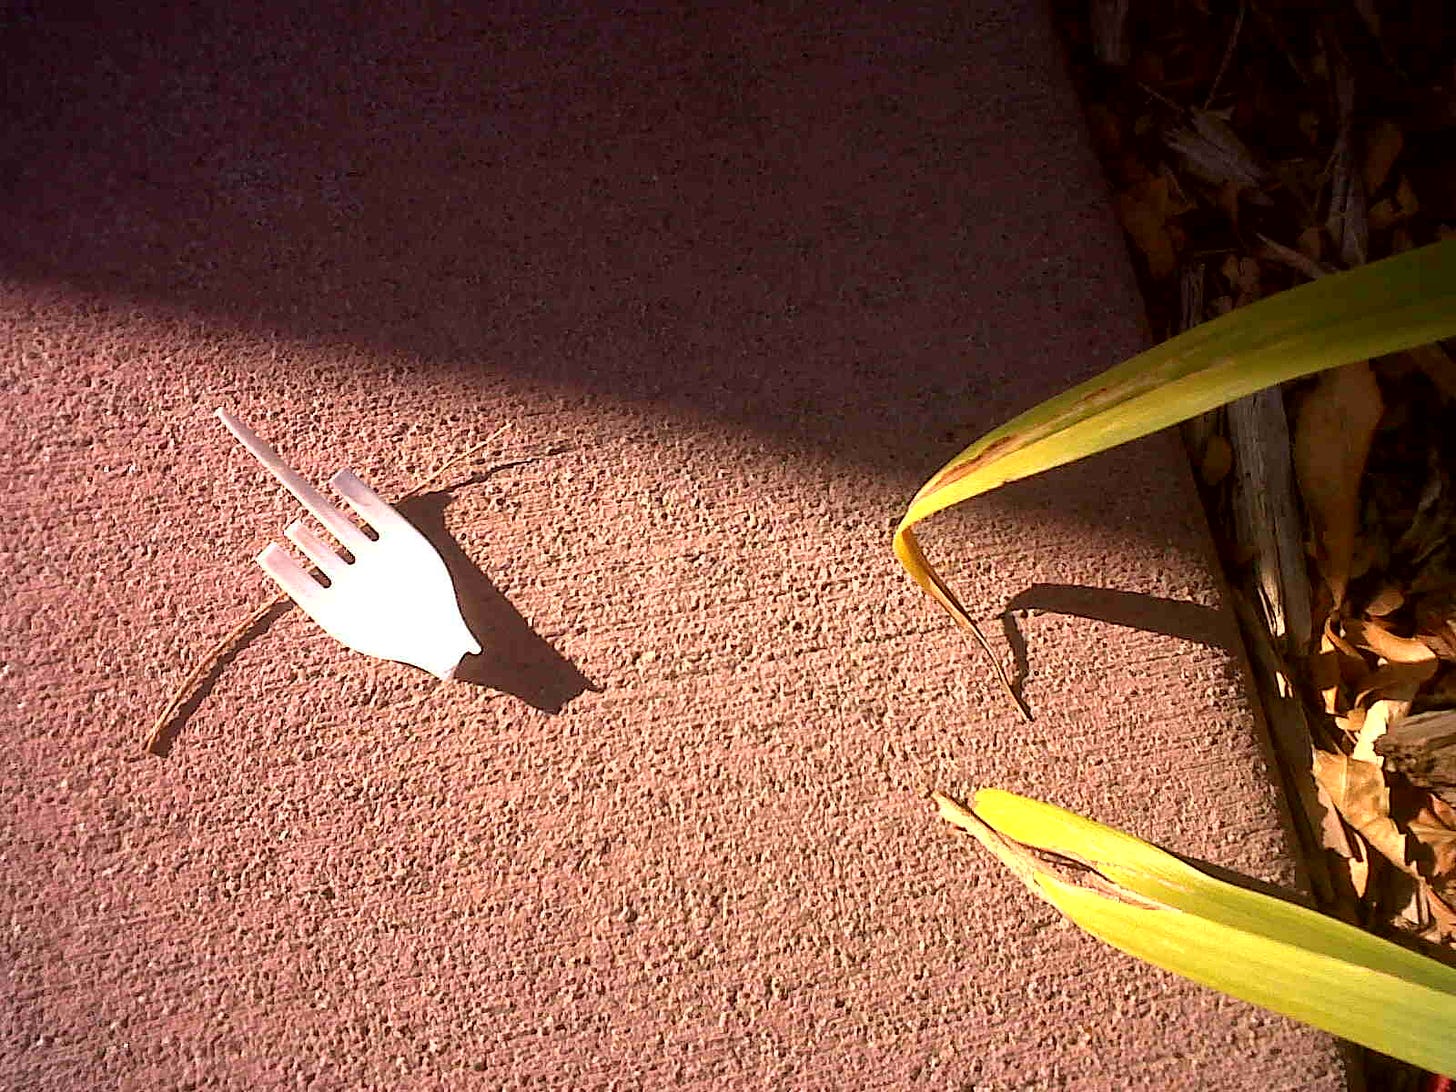 A broken fork without a handle and just one remaining tine, resembling the "middle finger" gesture, bathed in morning sunlight on the concrete sidewalk